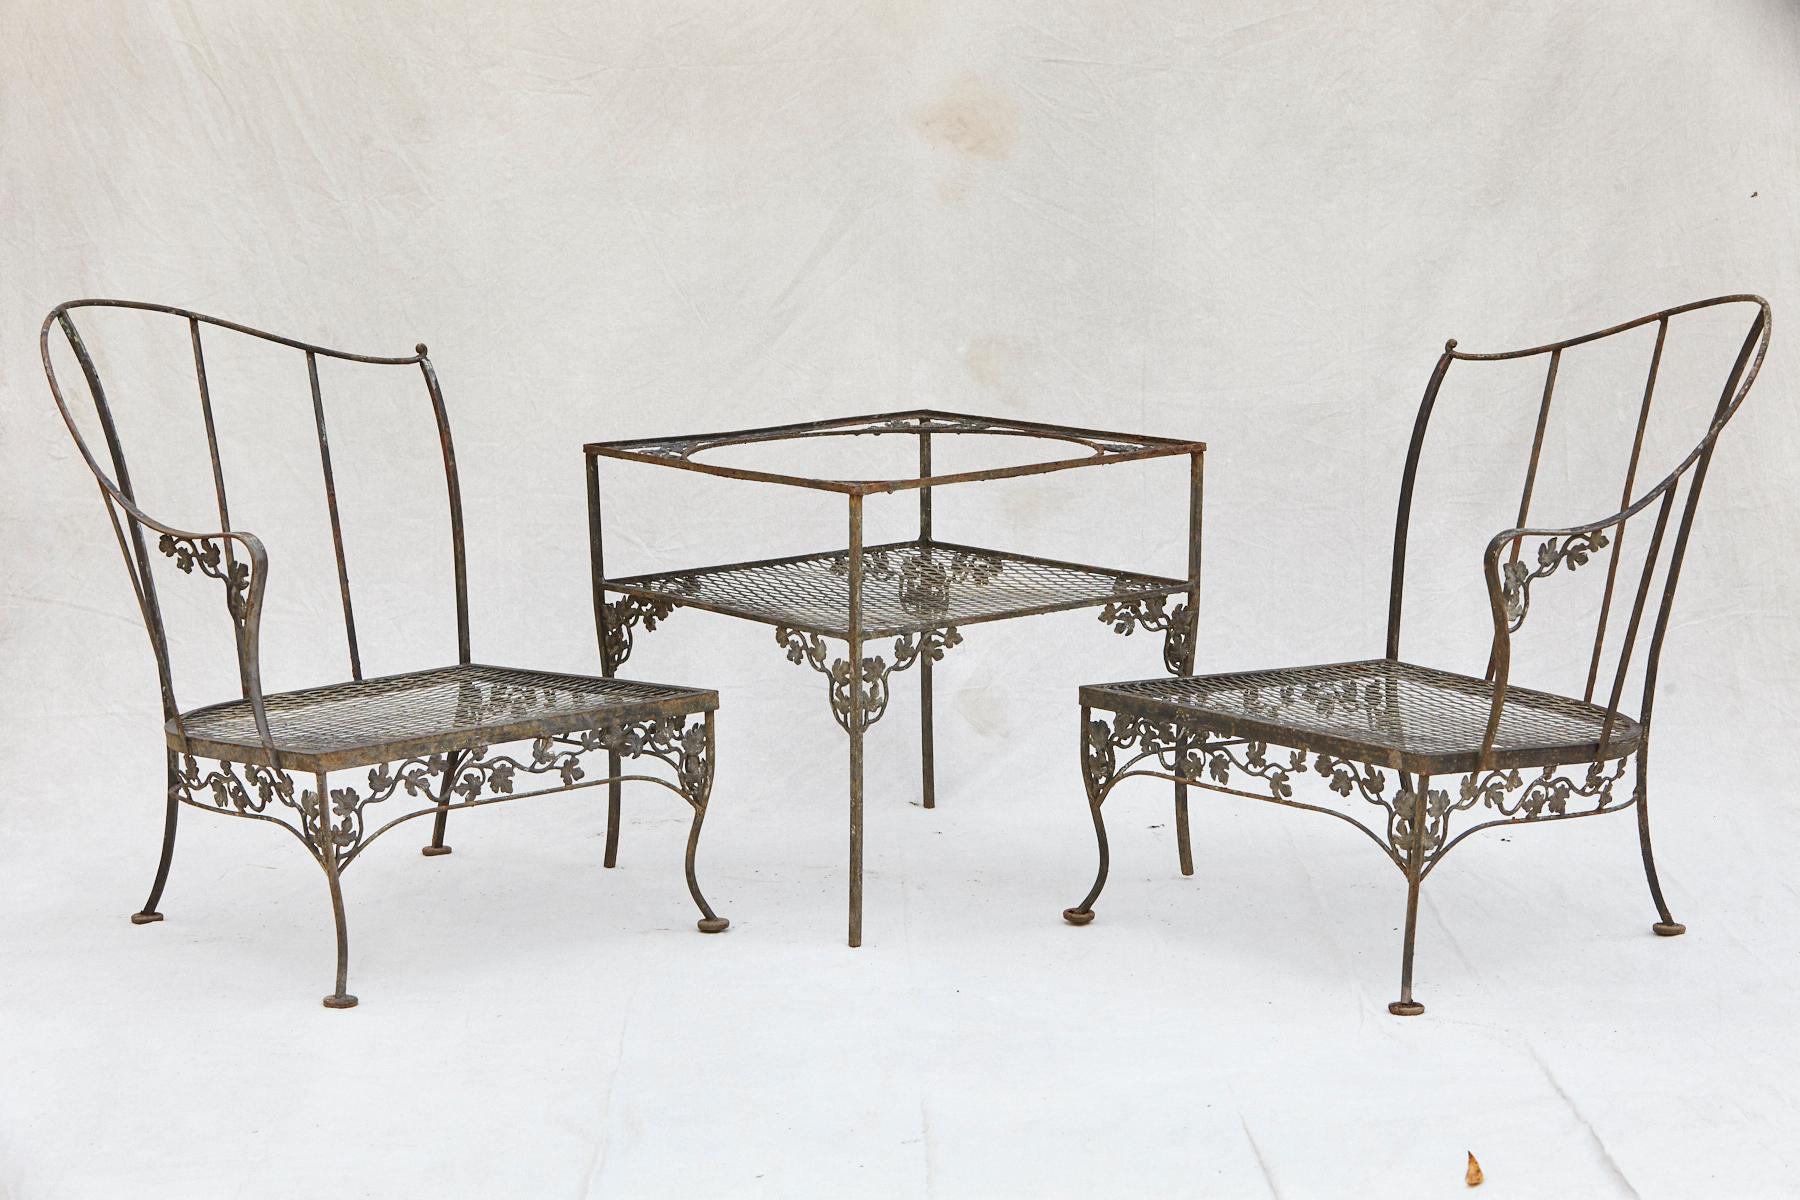 A beautiful grouping of Woodard wrought iron garden corner chairs with matching side table, with floral ornaments and lattice pattern, circa 1950s.
The square table has a depth of 24.5 inches, so have the chairs which create a very harmonious